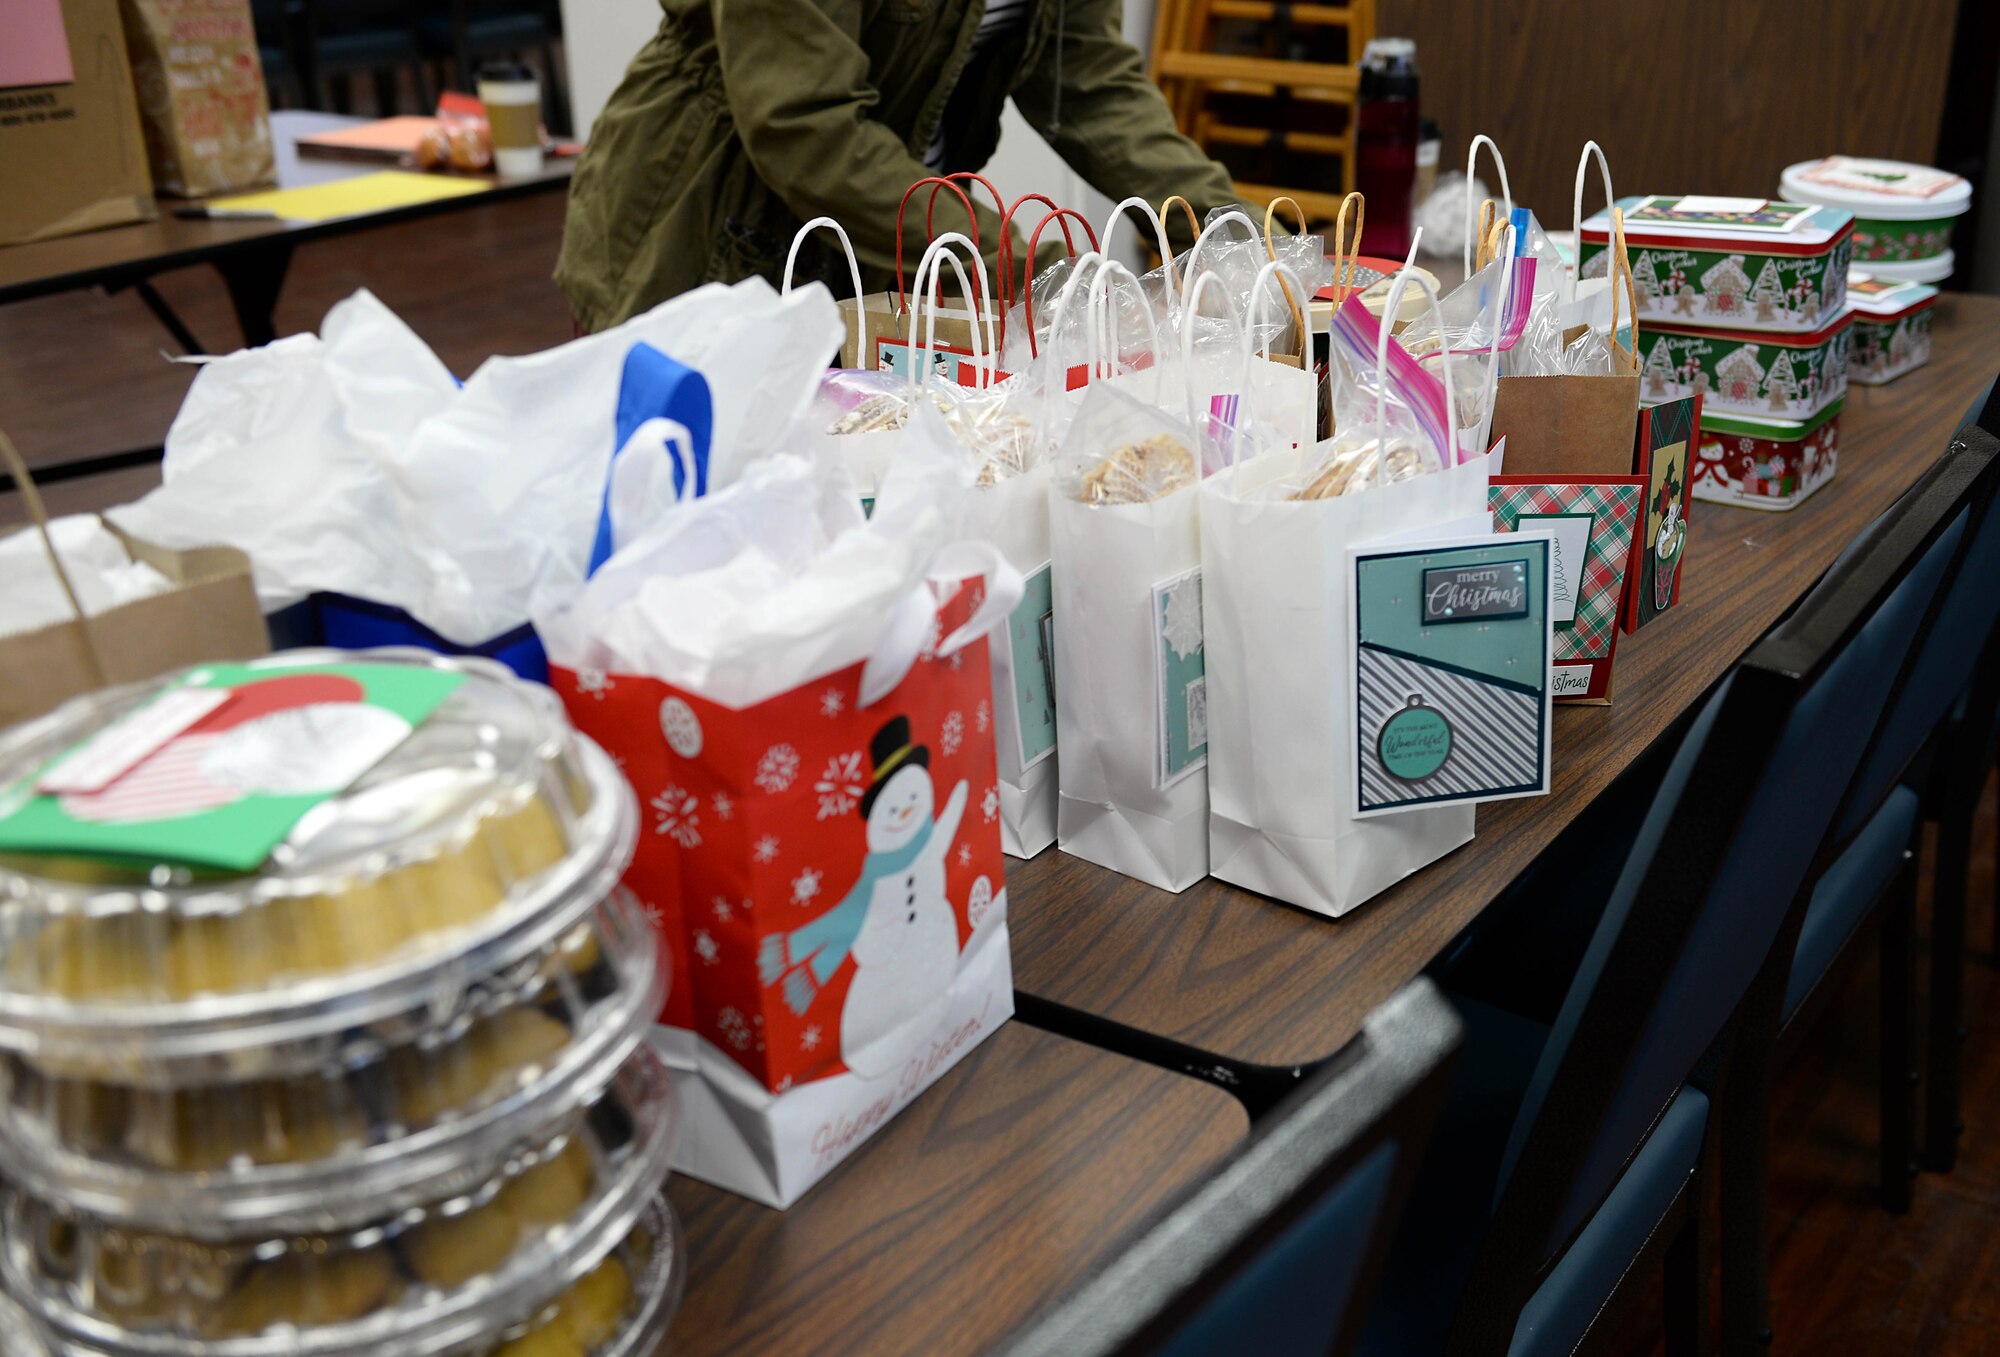 Bags and tins of cookies lay stacked on a table in preparation for the Columbus Spouses Club Cookie Drive at the BLAZE Chapel Annex Dec. 16, 2019, on Columbus Air Force Base, Miss. Volunteers from across the base and community came together to bake, package and deliver nearly 700 dozen cookies to Airmen across the base. (U.S. Air Force photo by Airman 1st Class Hannah Bean)